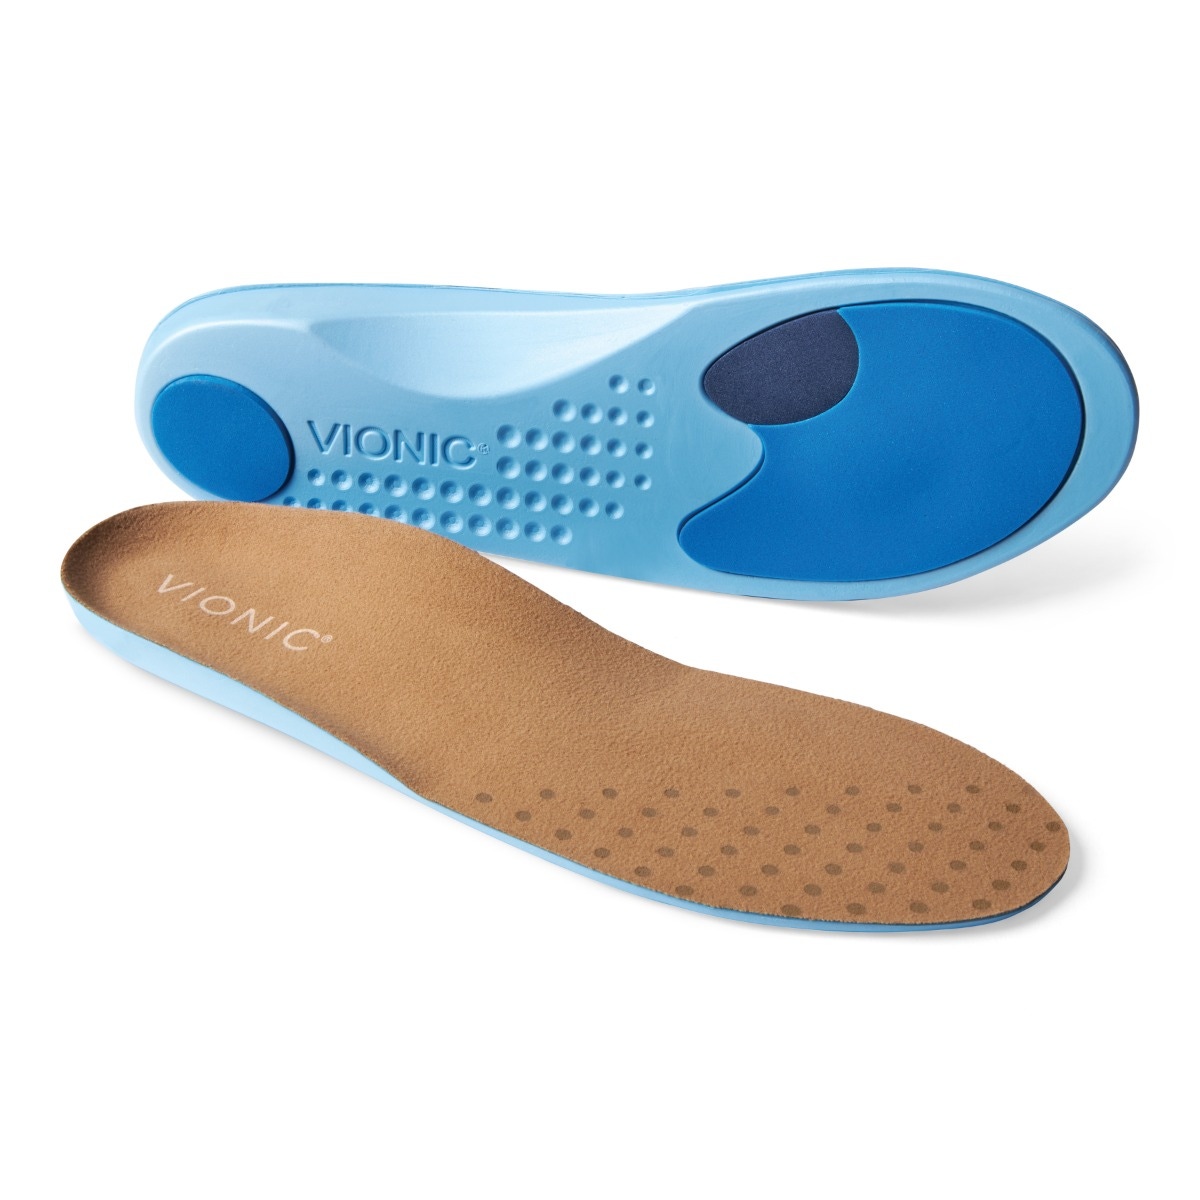 Vionic Relief Full Length Insoles - Women's